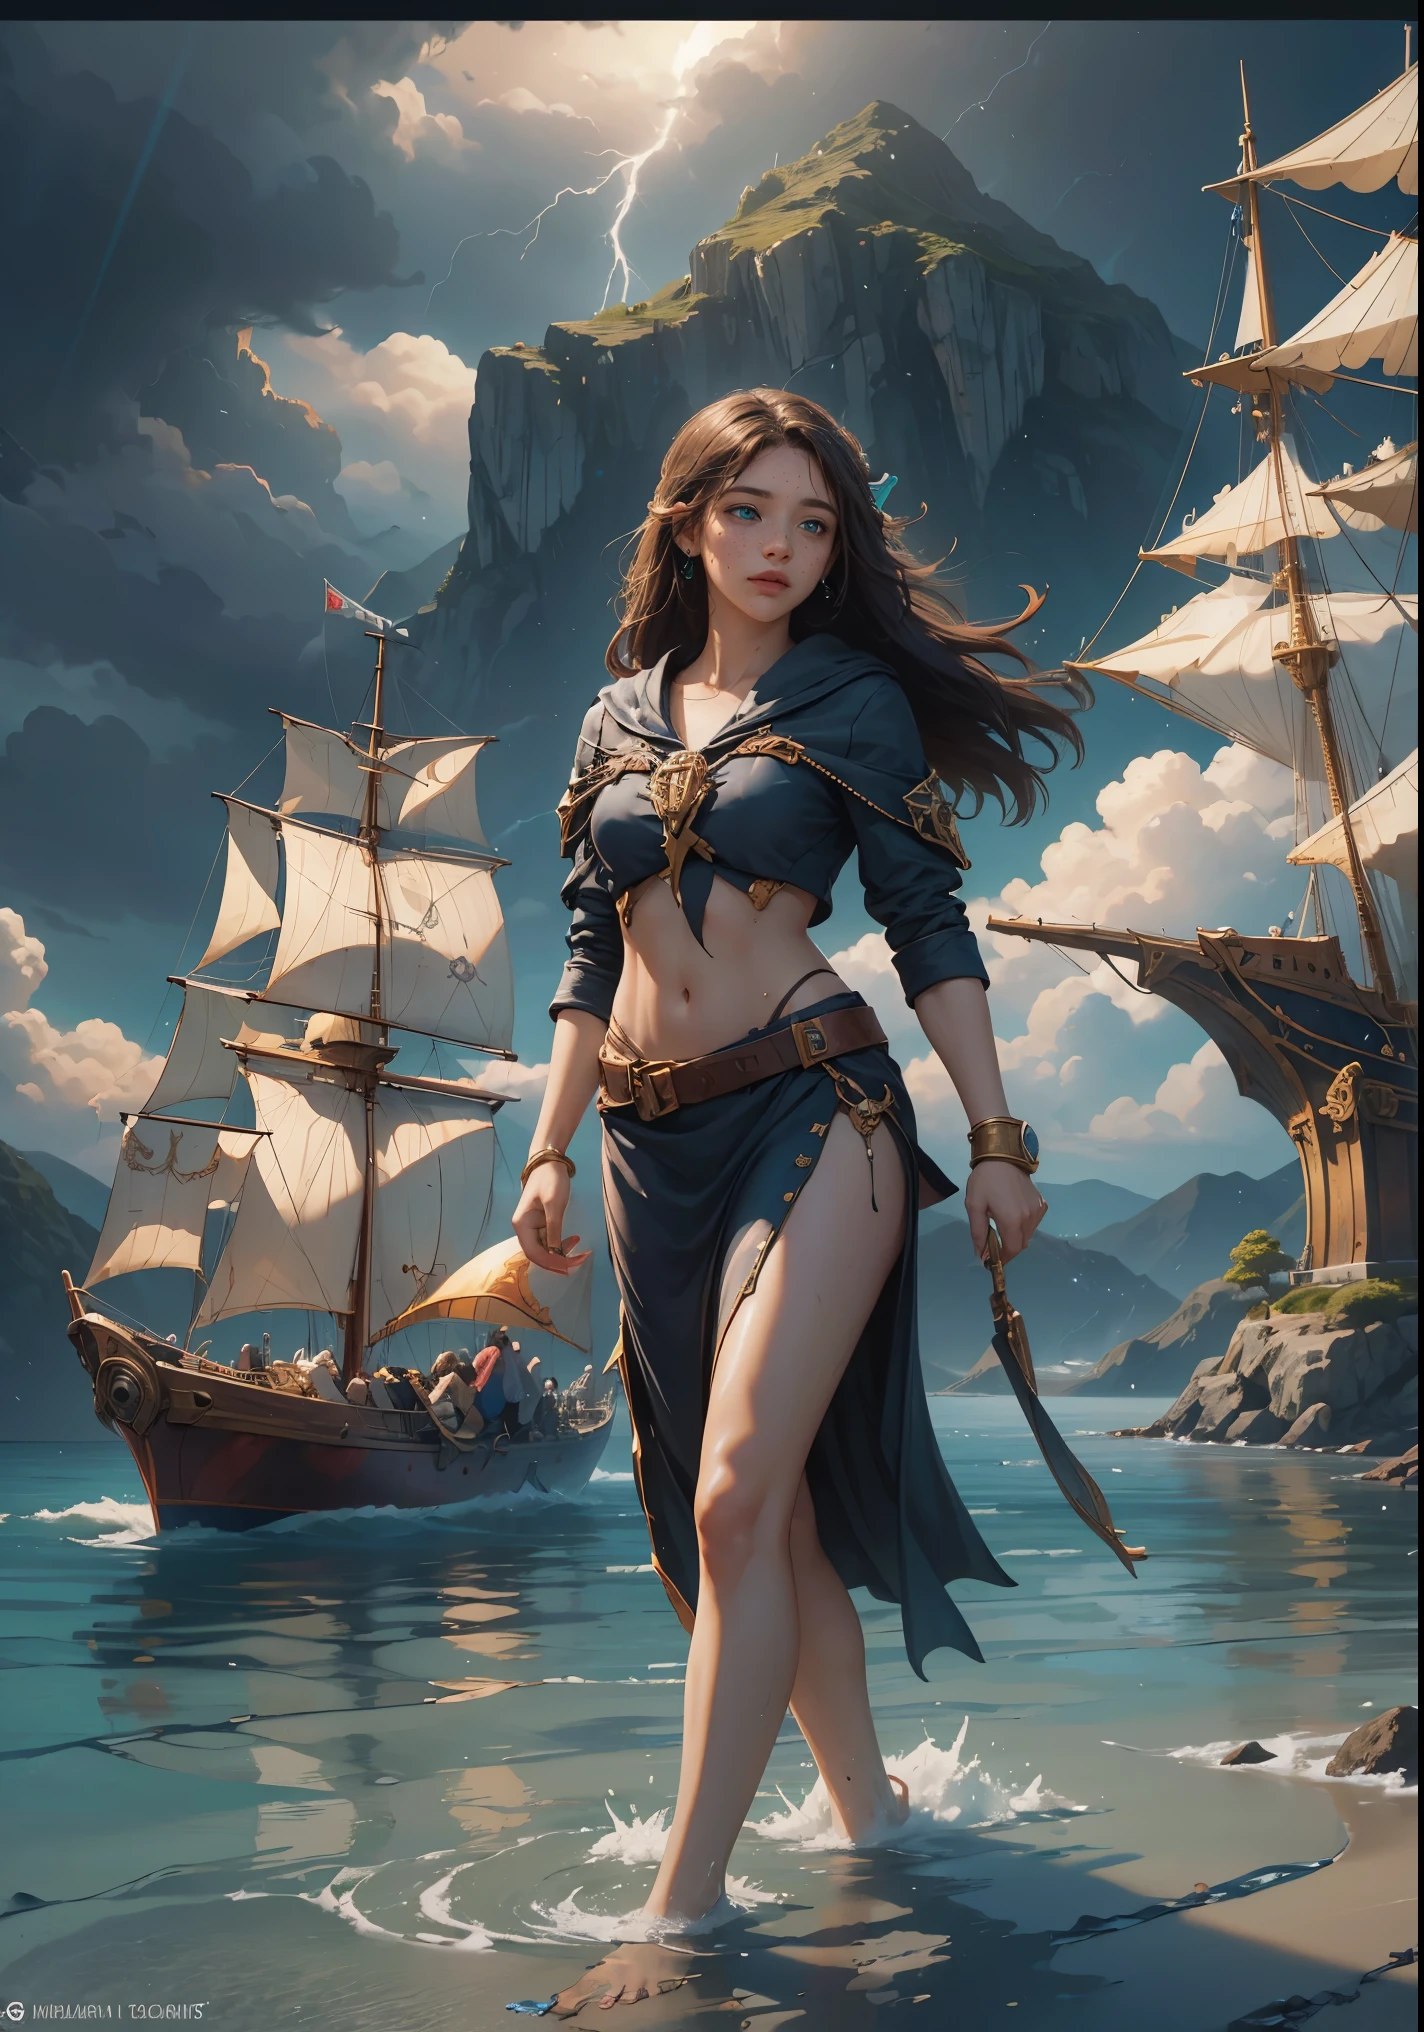 (portrait_of_a_sexy_corsair_girl_holding_a_fintlock_pistol_walking_in_shallow_water:1.7), slim, skinny, (see_through_dressed:1.6), (wet),(half_naked), (surface), (coral_reef_surrounded:1.3),(translucent_ocean:1.5), (ocean), (sailboat_explodes_background:1.9), 1girl, (bird), (ship), , (dark_sky:1.446), (thunder:1.53), (storm:1.53), realistic, (beach), cloud, blood, stone, scenery, (wading), (mount island, floating_island:1.45), (looking_at_viewer:1.5), prt, air_bubble, aurora, bubble, caustics, plant, scenery, shark, (surreal), waterfall, wave, prt, (age_of_piracy:1.5)